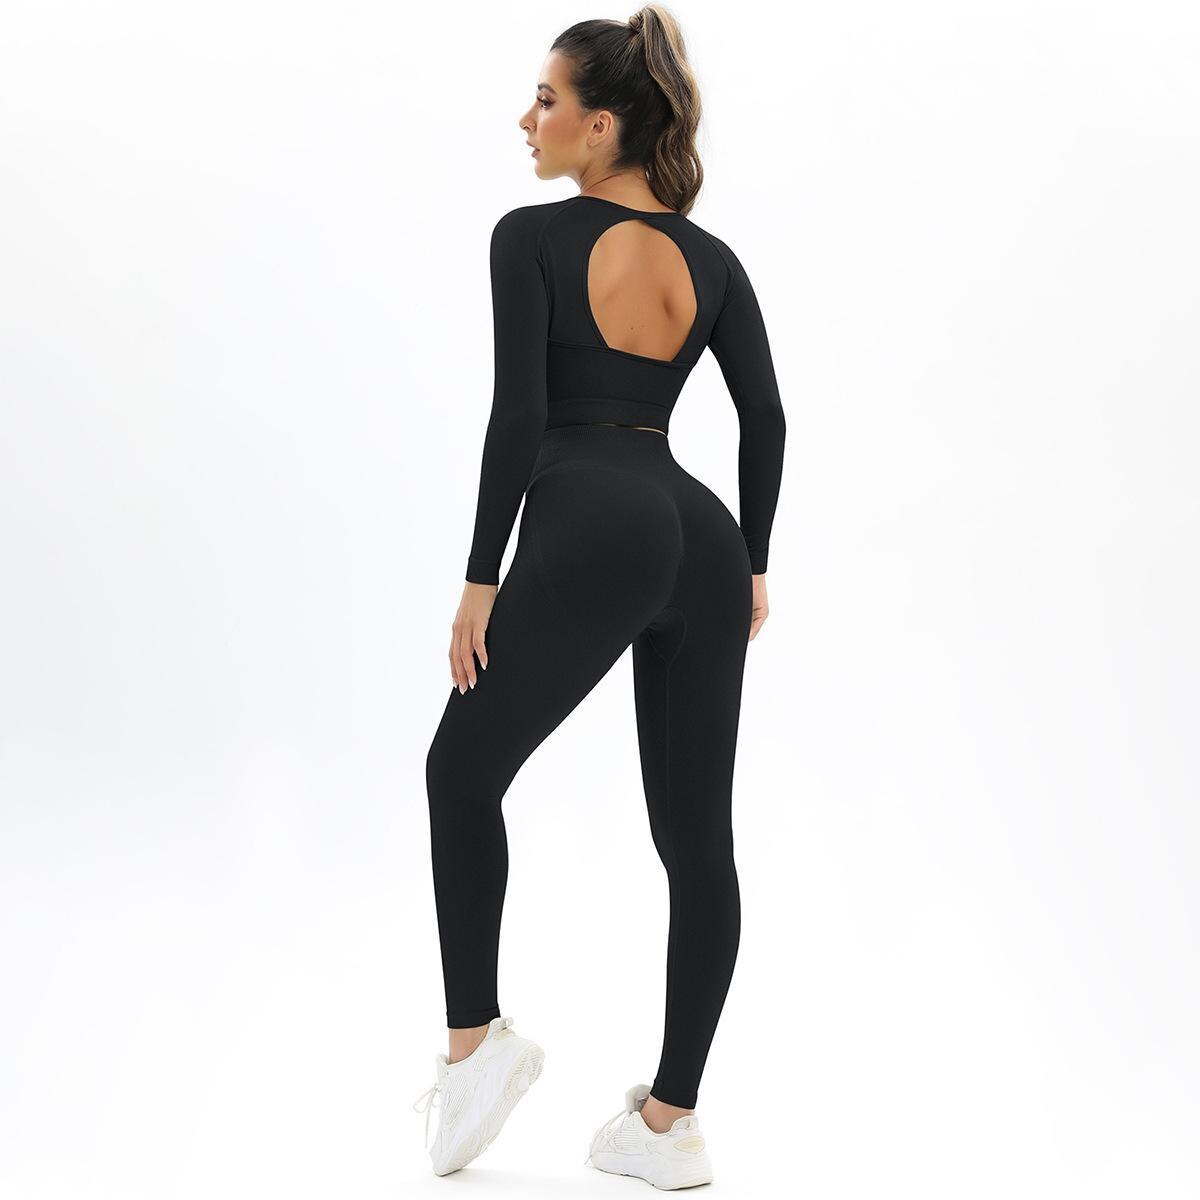 2-Pieces-Yoga-Sets-Sport-Femme-Activewear-Set-Girls-Seamless-Fitness-Suit-Workout-Clothes-Athletic-Wear-2